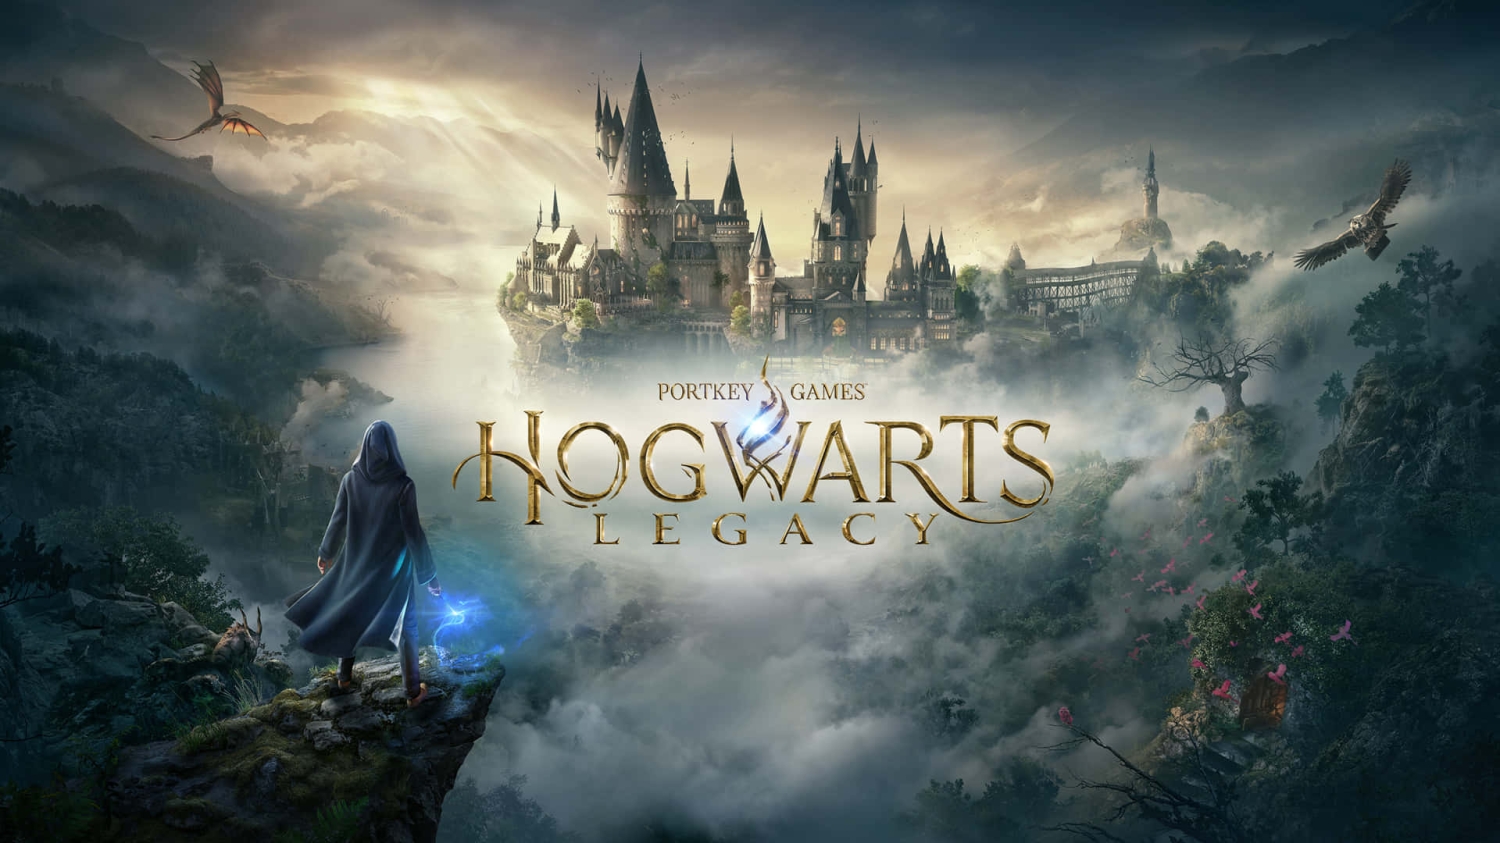 Will there be a Hogwarts Legacy sequel? Warner Bros. tease plans